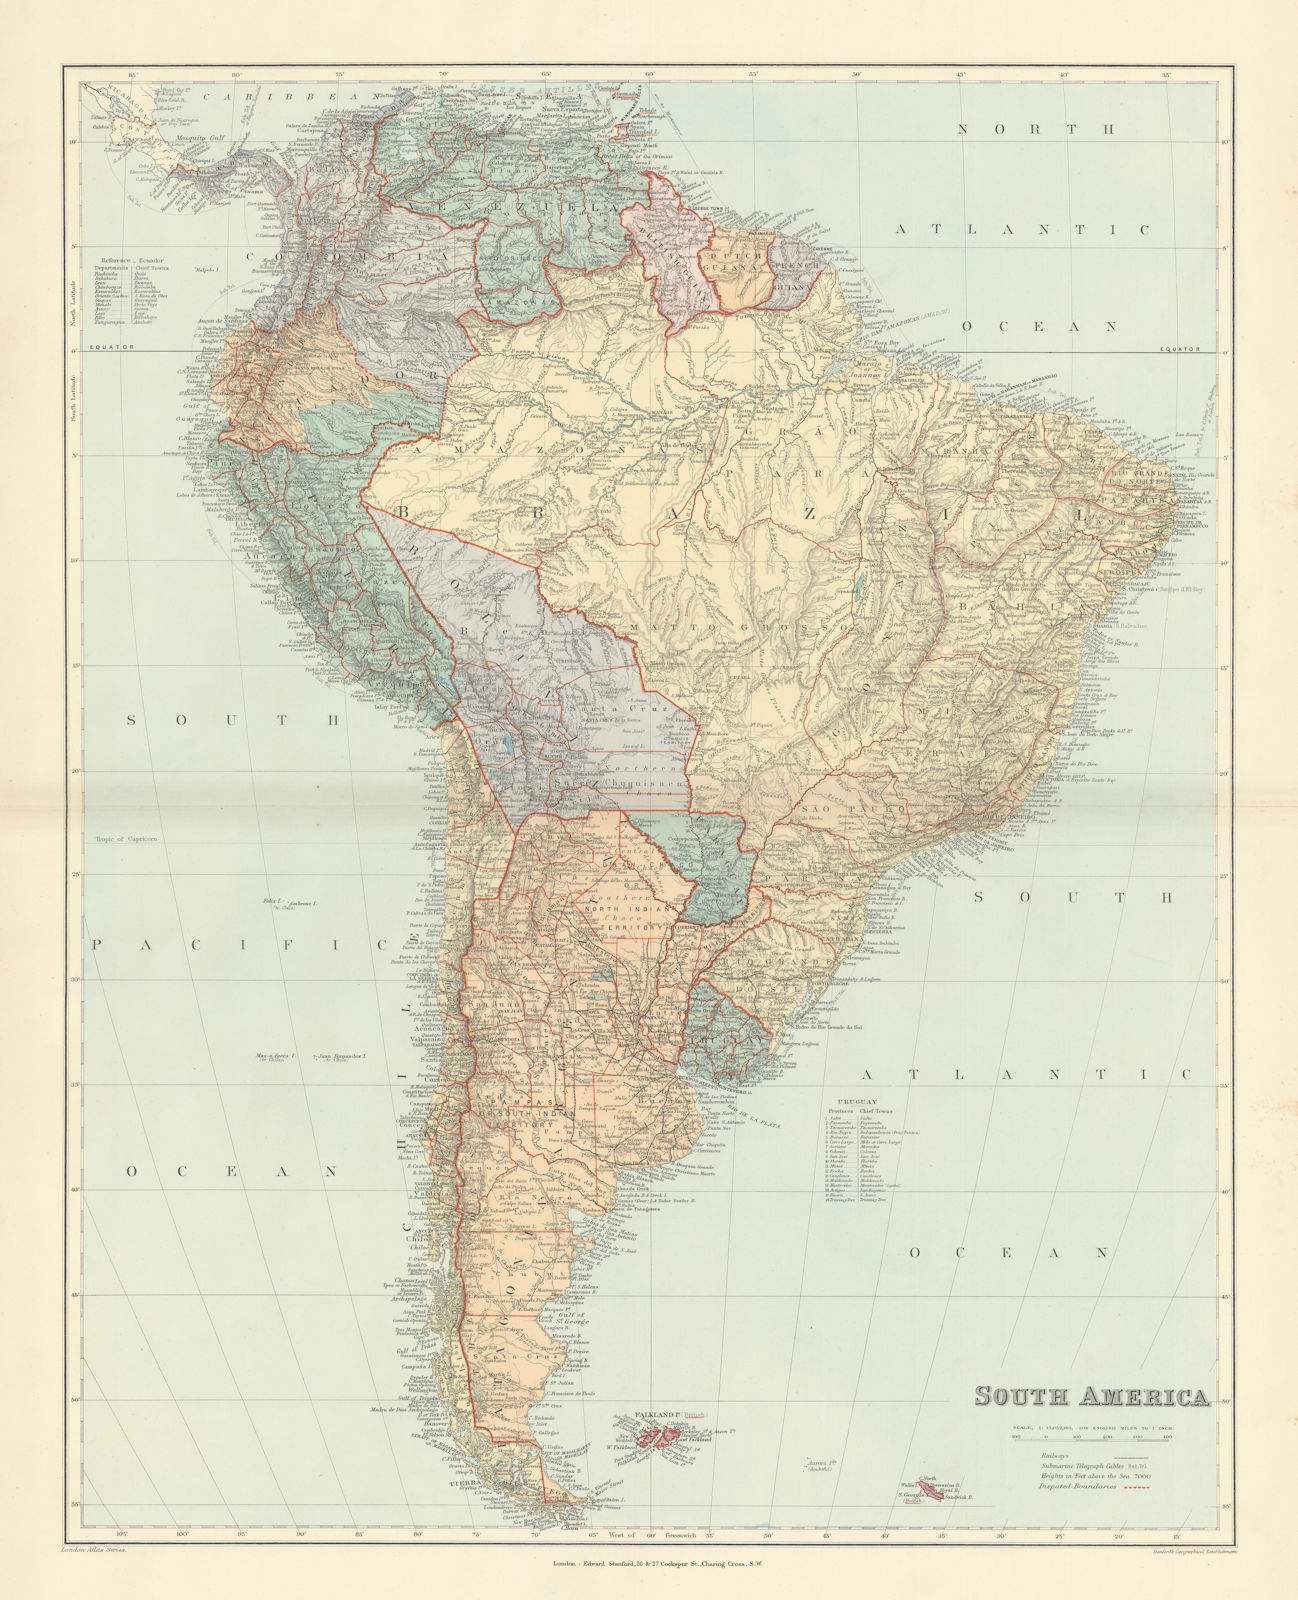 Associate Product South America. Large 64x51cm. STANFORD 1896 old antique vintage map plan chart